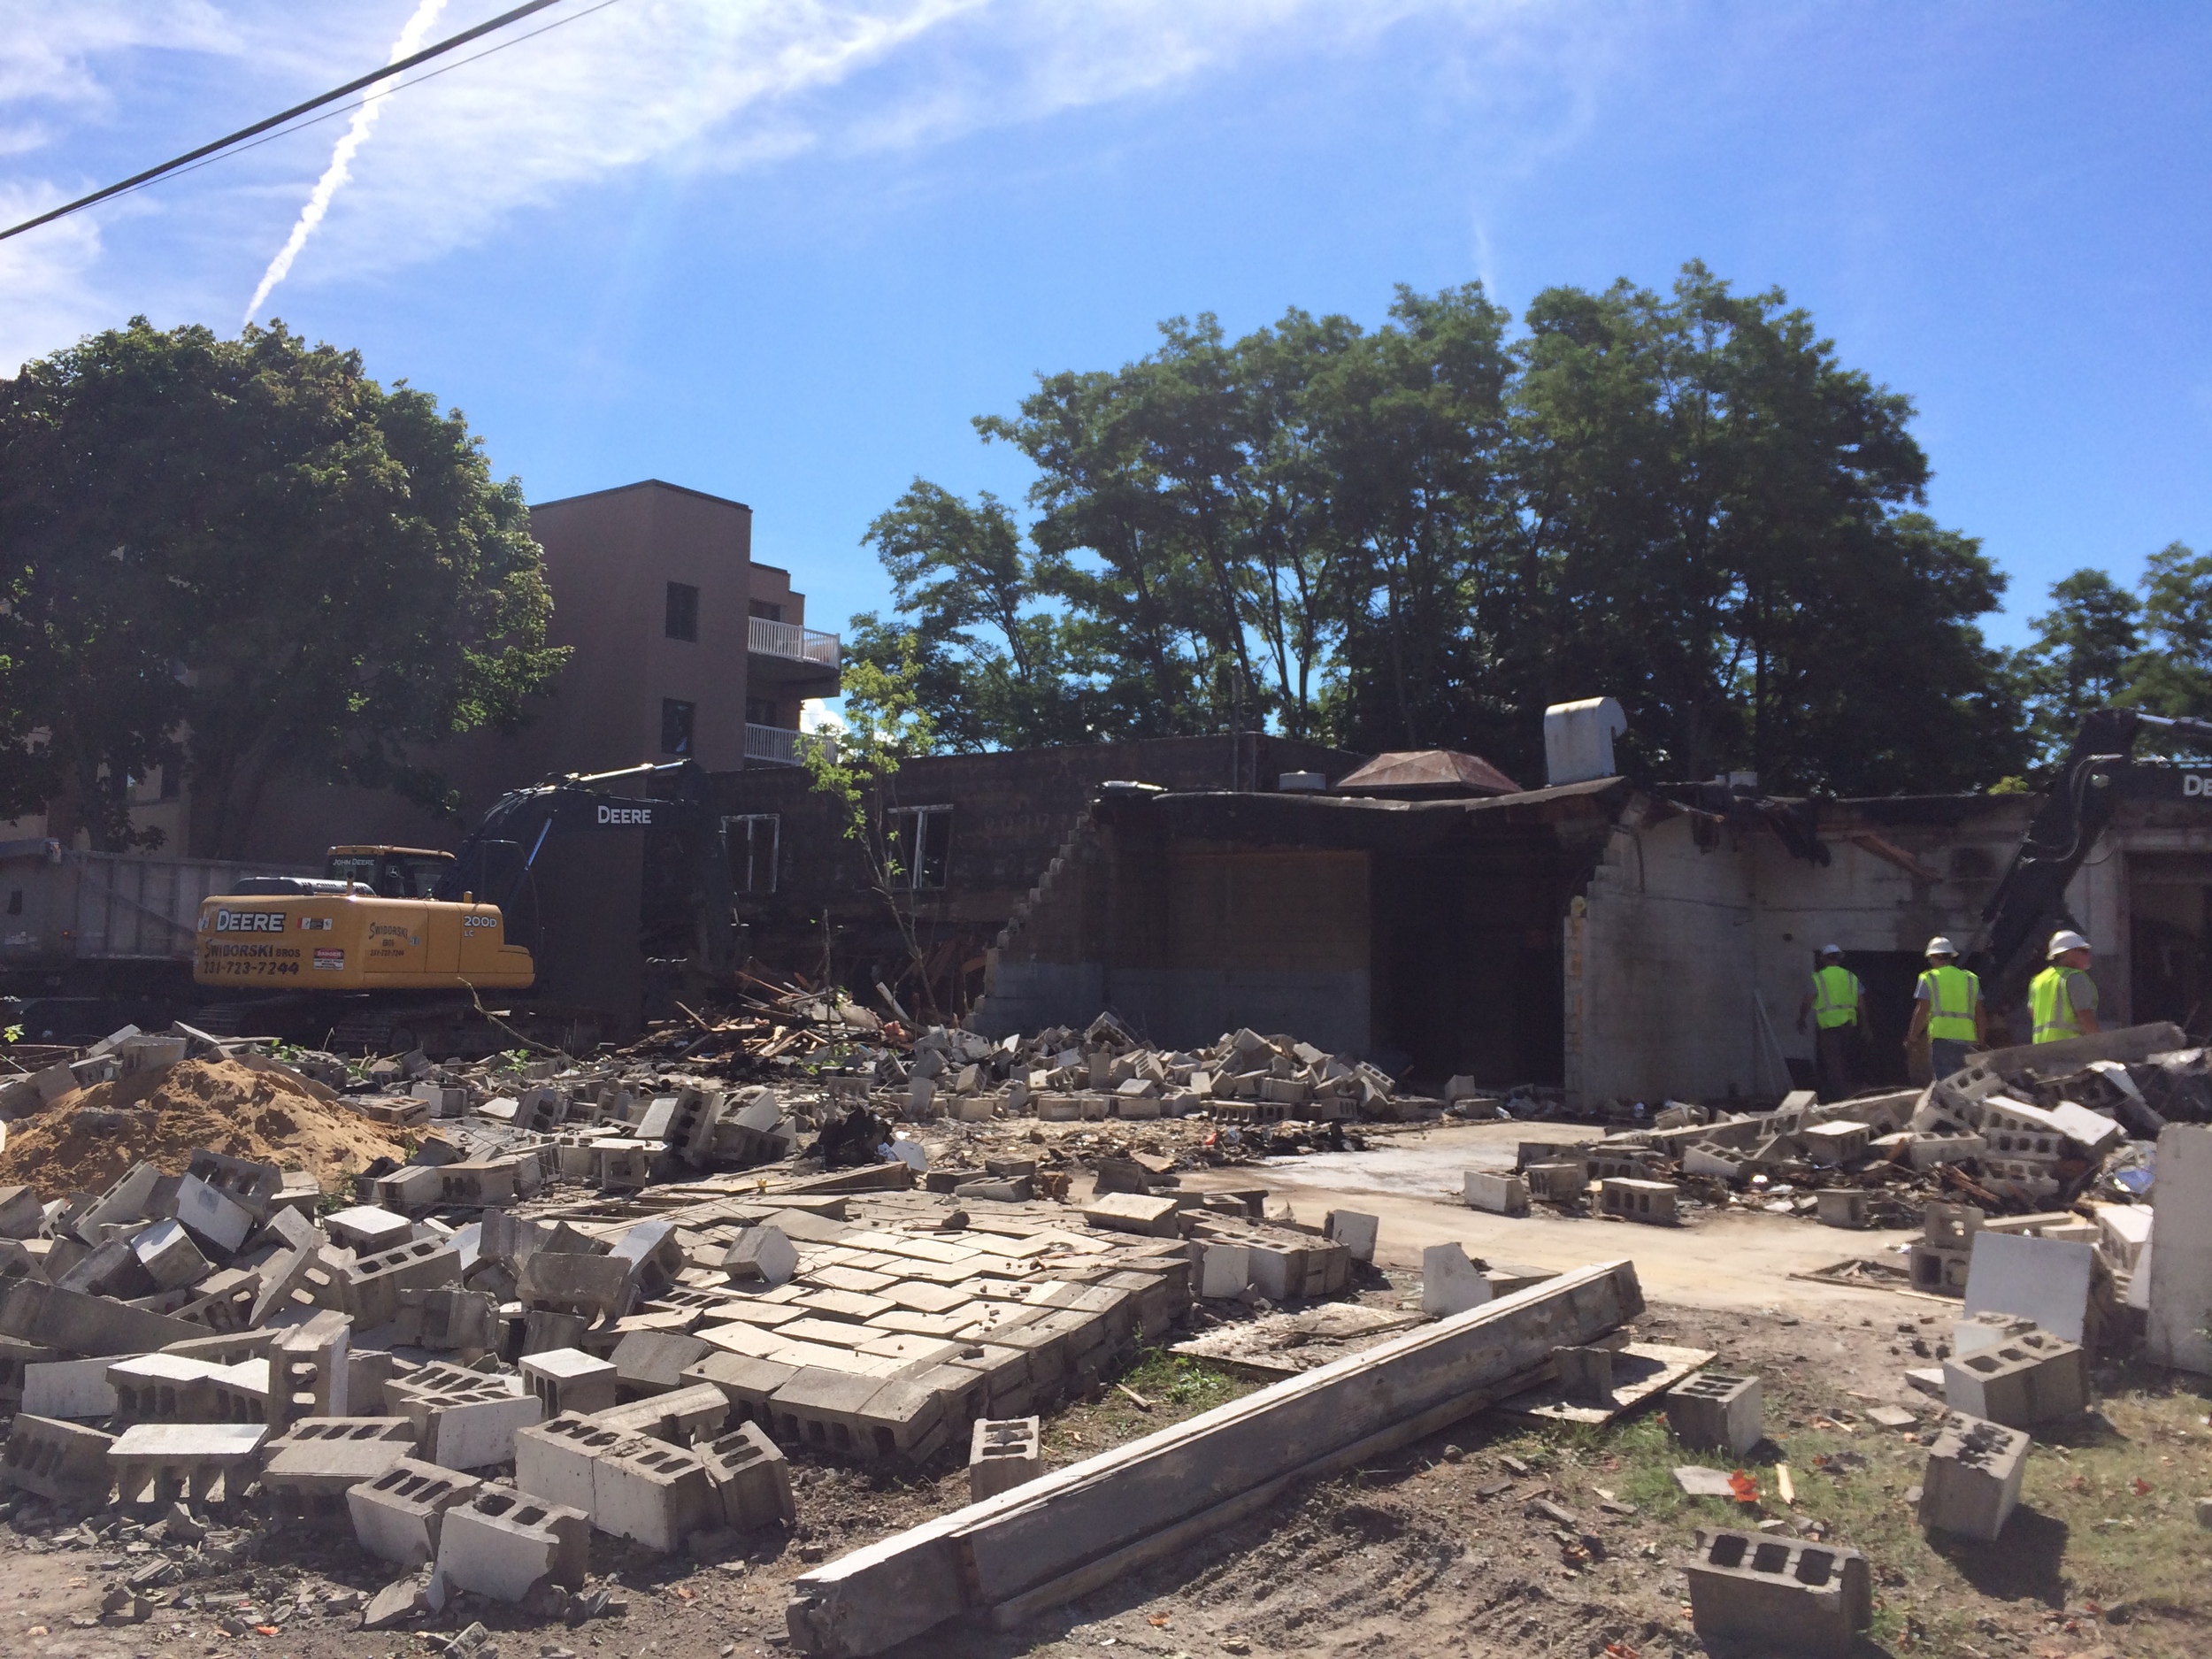  Manistee Plating Building Demolition and Clean-up, photo 1 